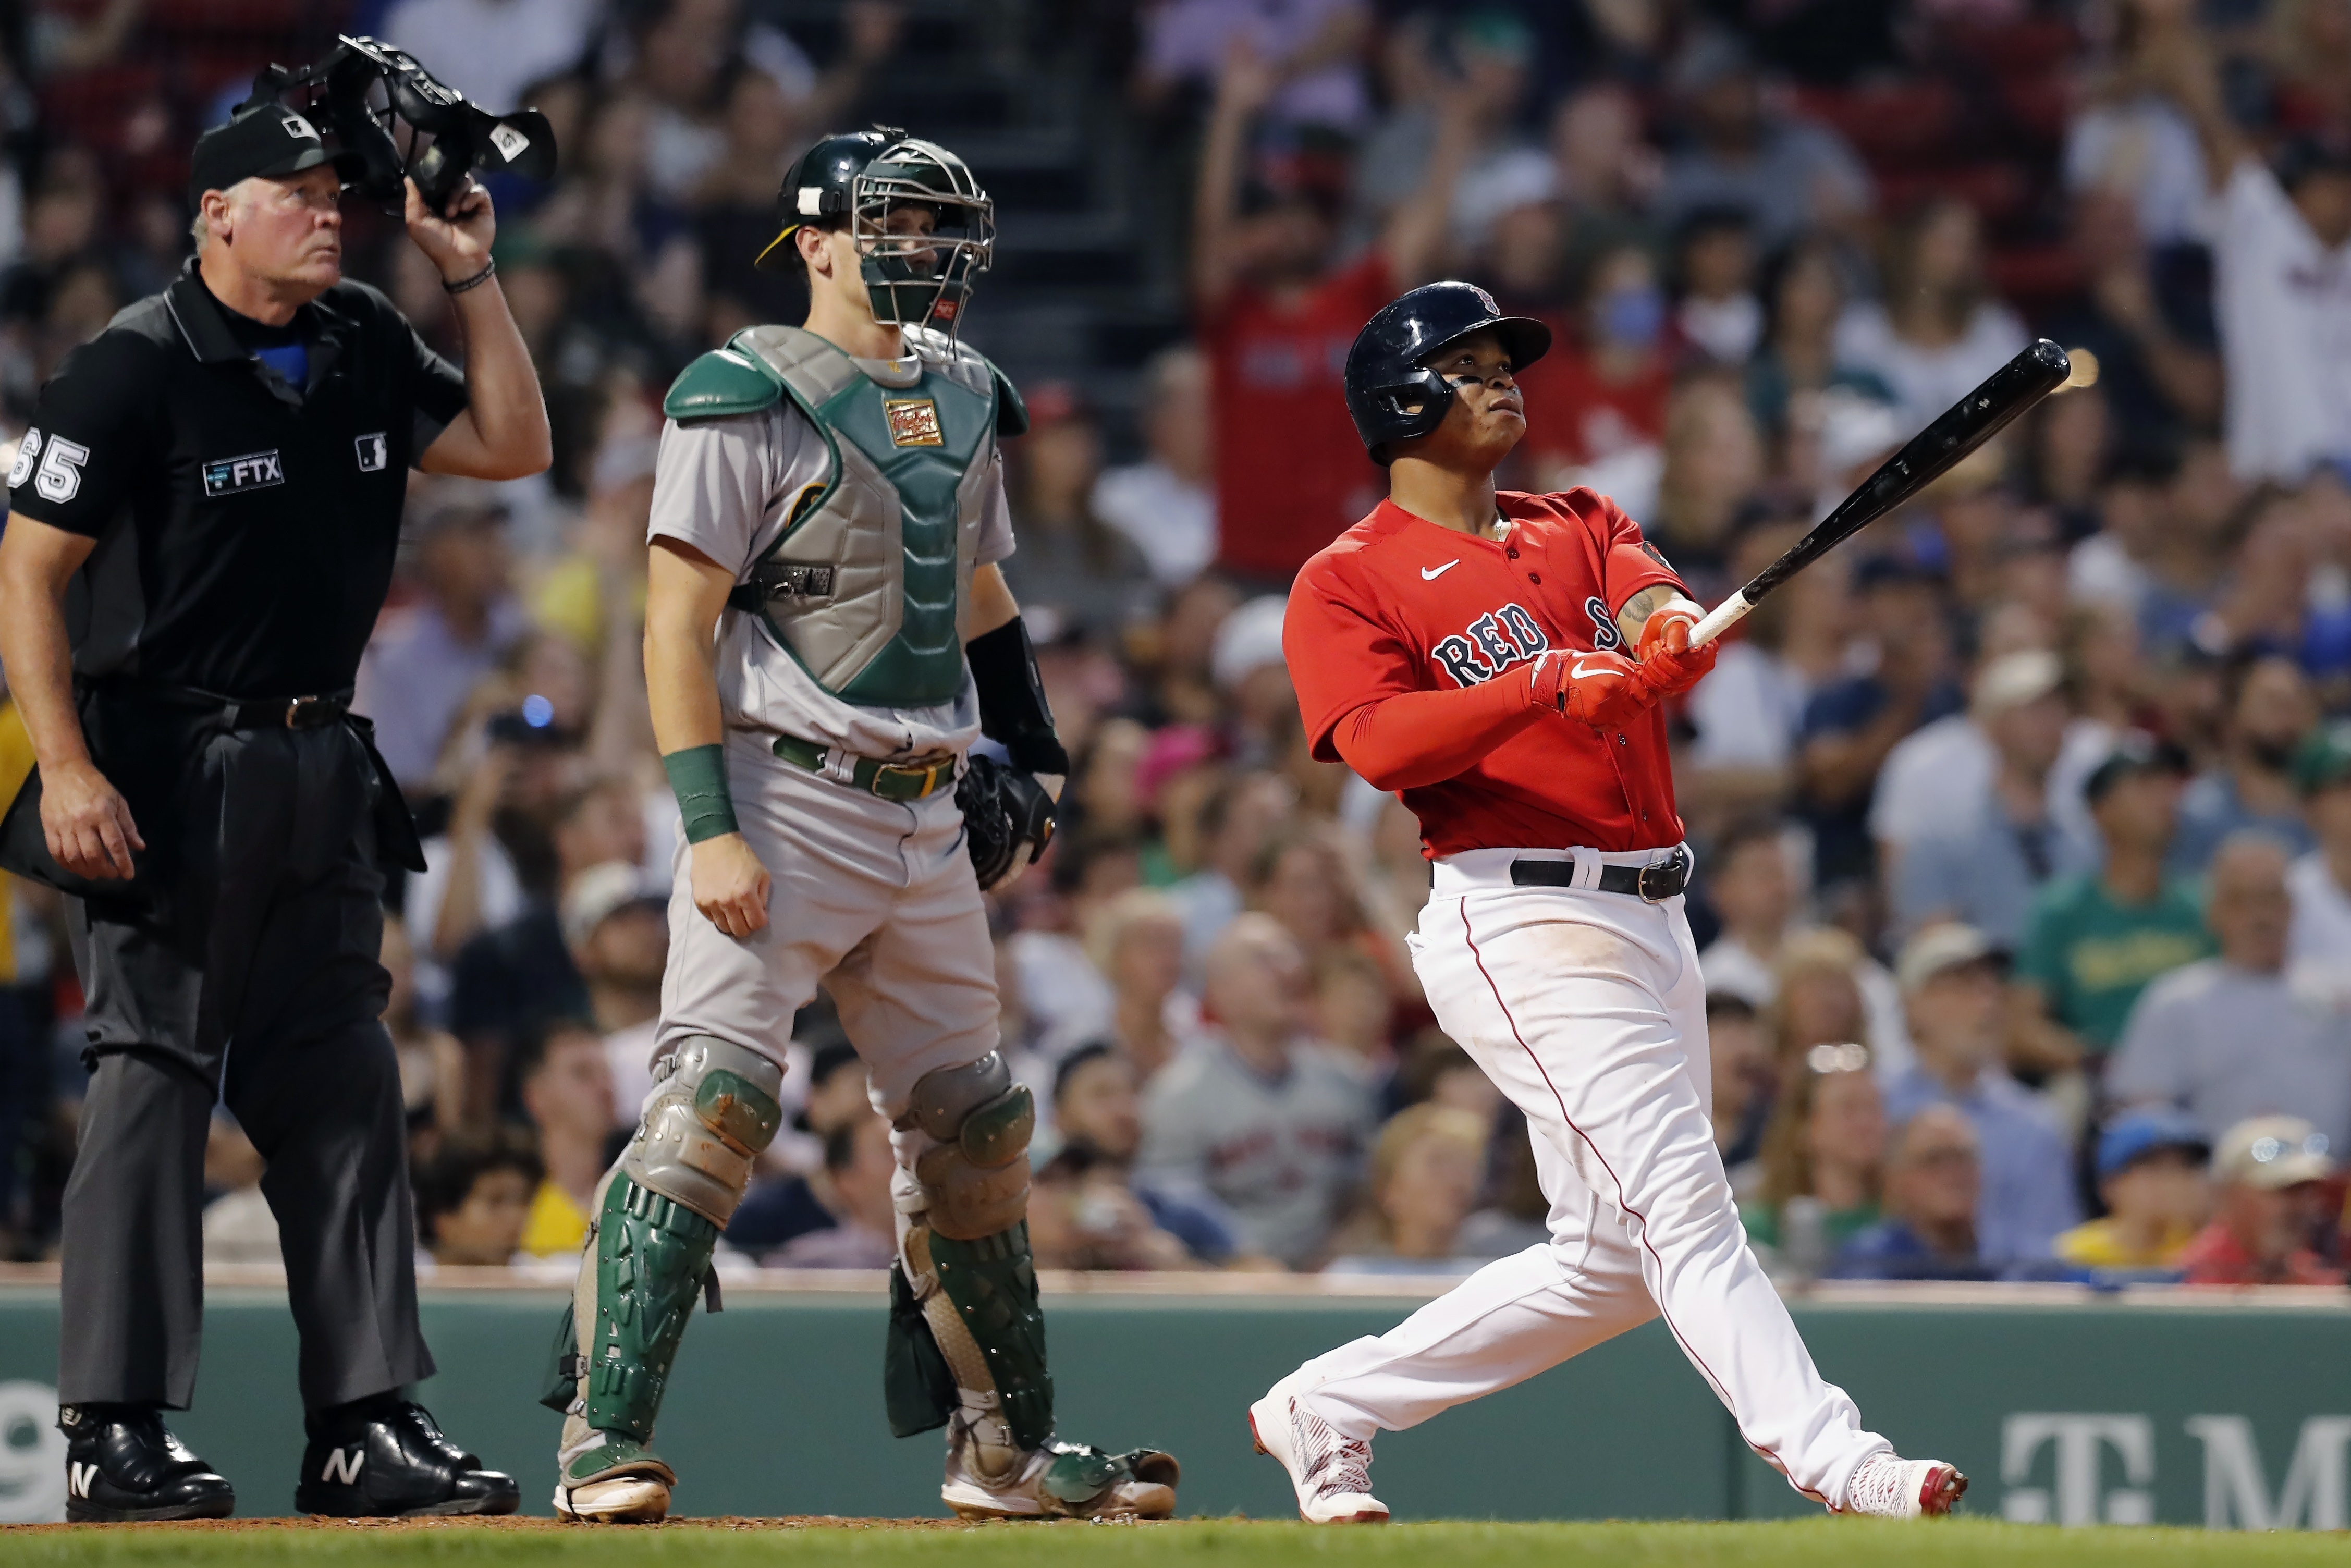 Red Sox' J.D. Martinez hits 3 home runs against Orioles: 'Right now, he's  locked in and I'm glad he's swinging the bat the way he is,' Alex Cora says  – Blogging the